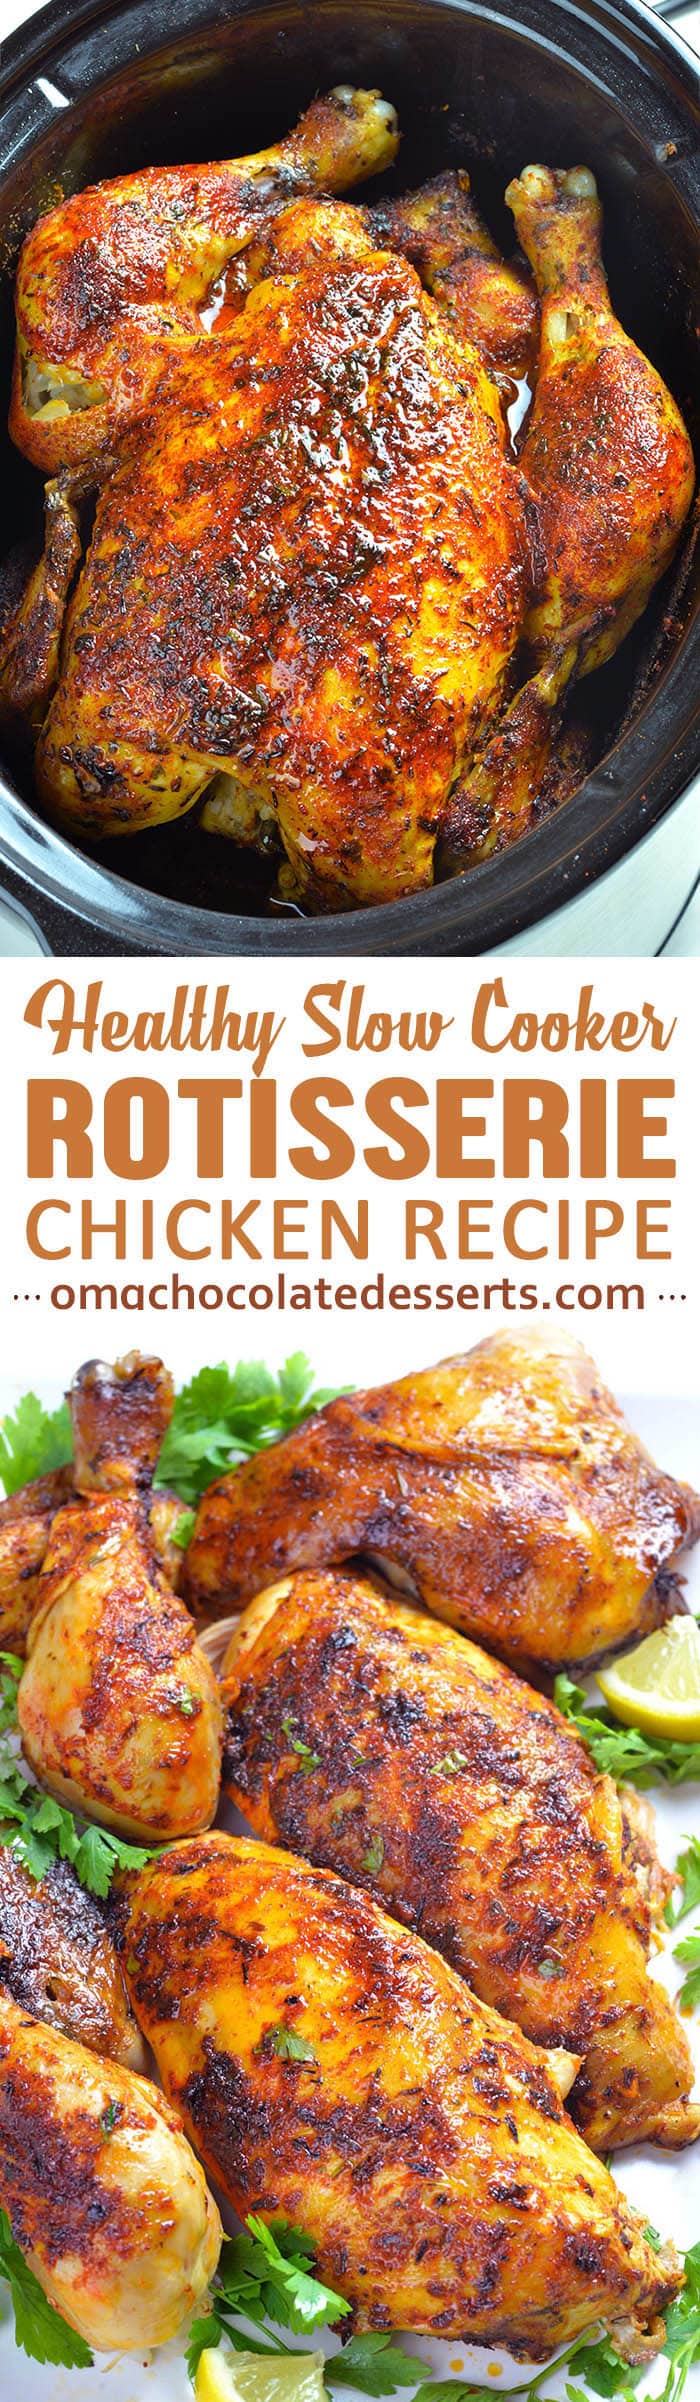 Slow Cooker Rotisserie Chicken recipe - You can serve it as a main dish. Add some veggies and salad and you have quick, easy, delicious and healthy meal for whole family.